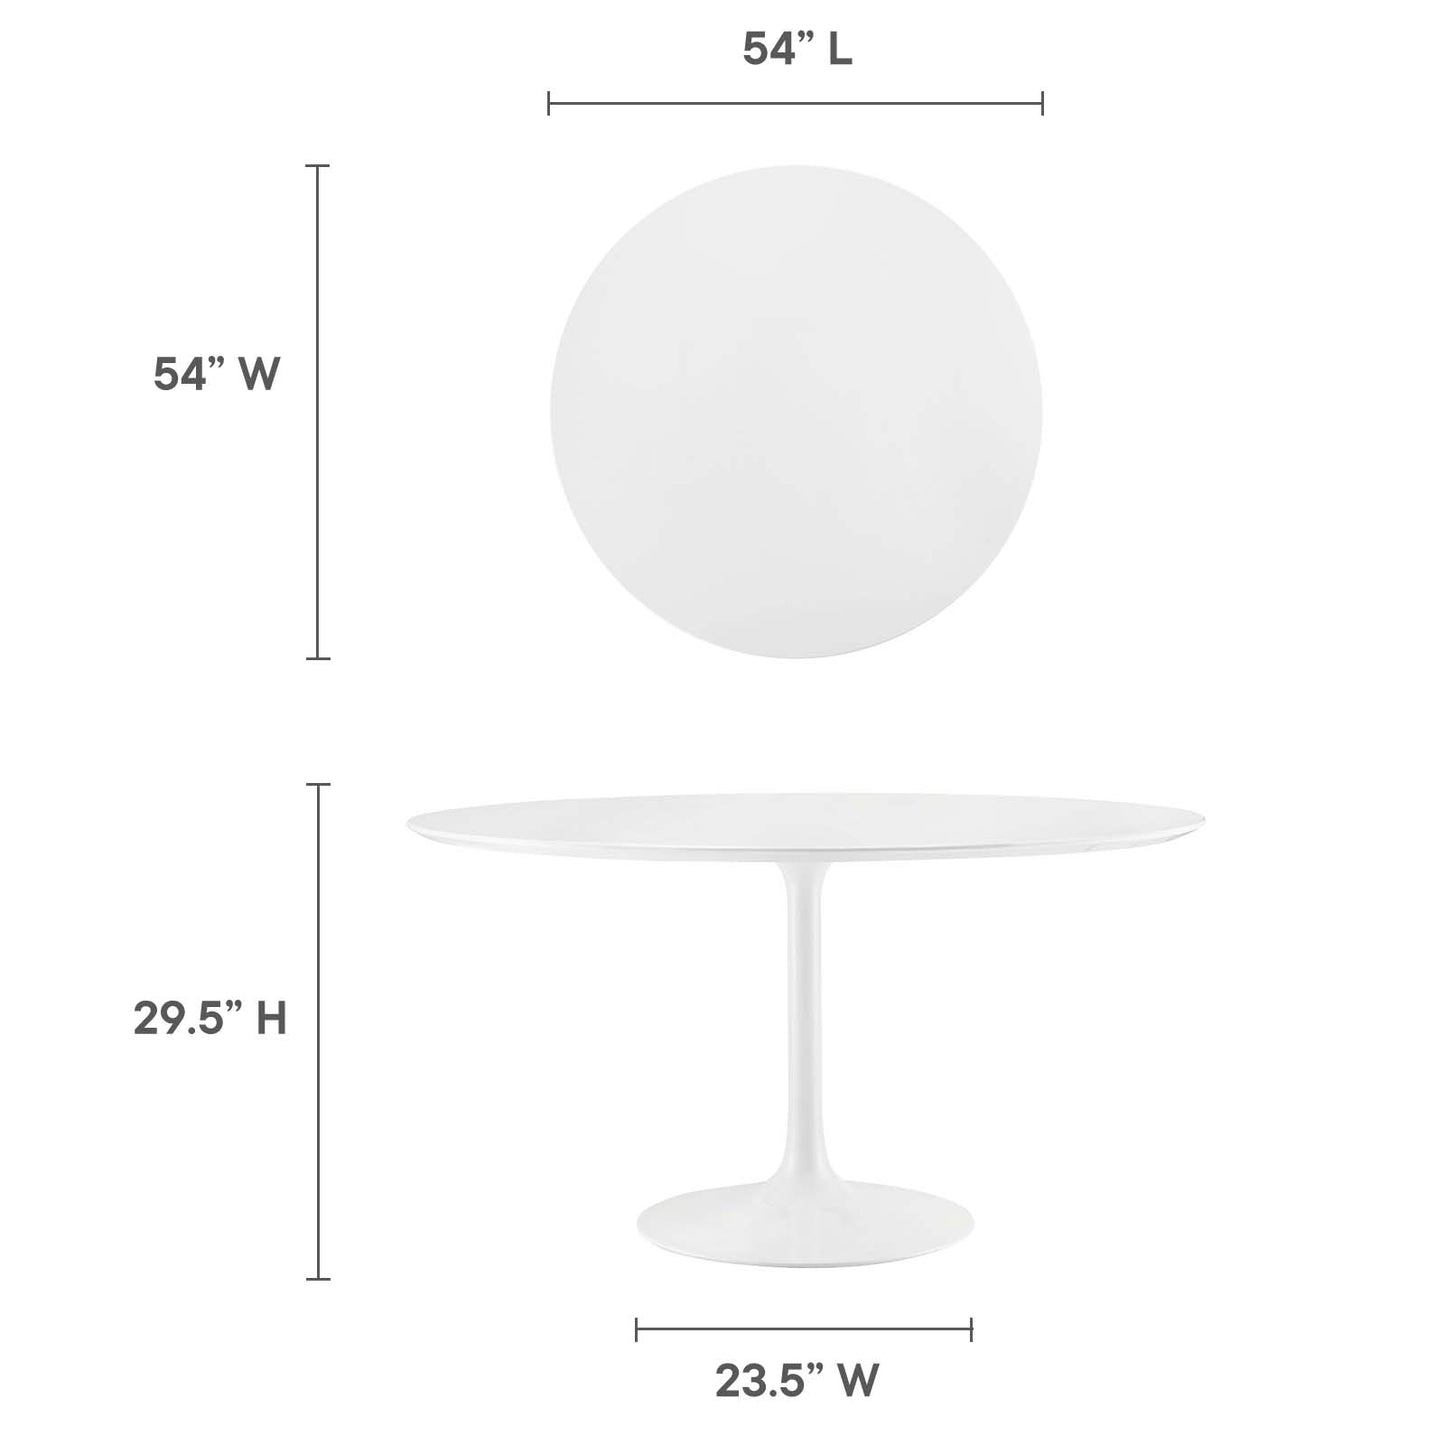 Modway Lippa 54" Round Wood Top Dining Table in White - EEI-1119